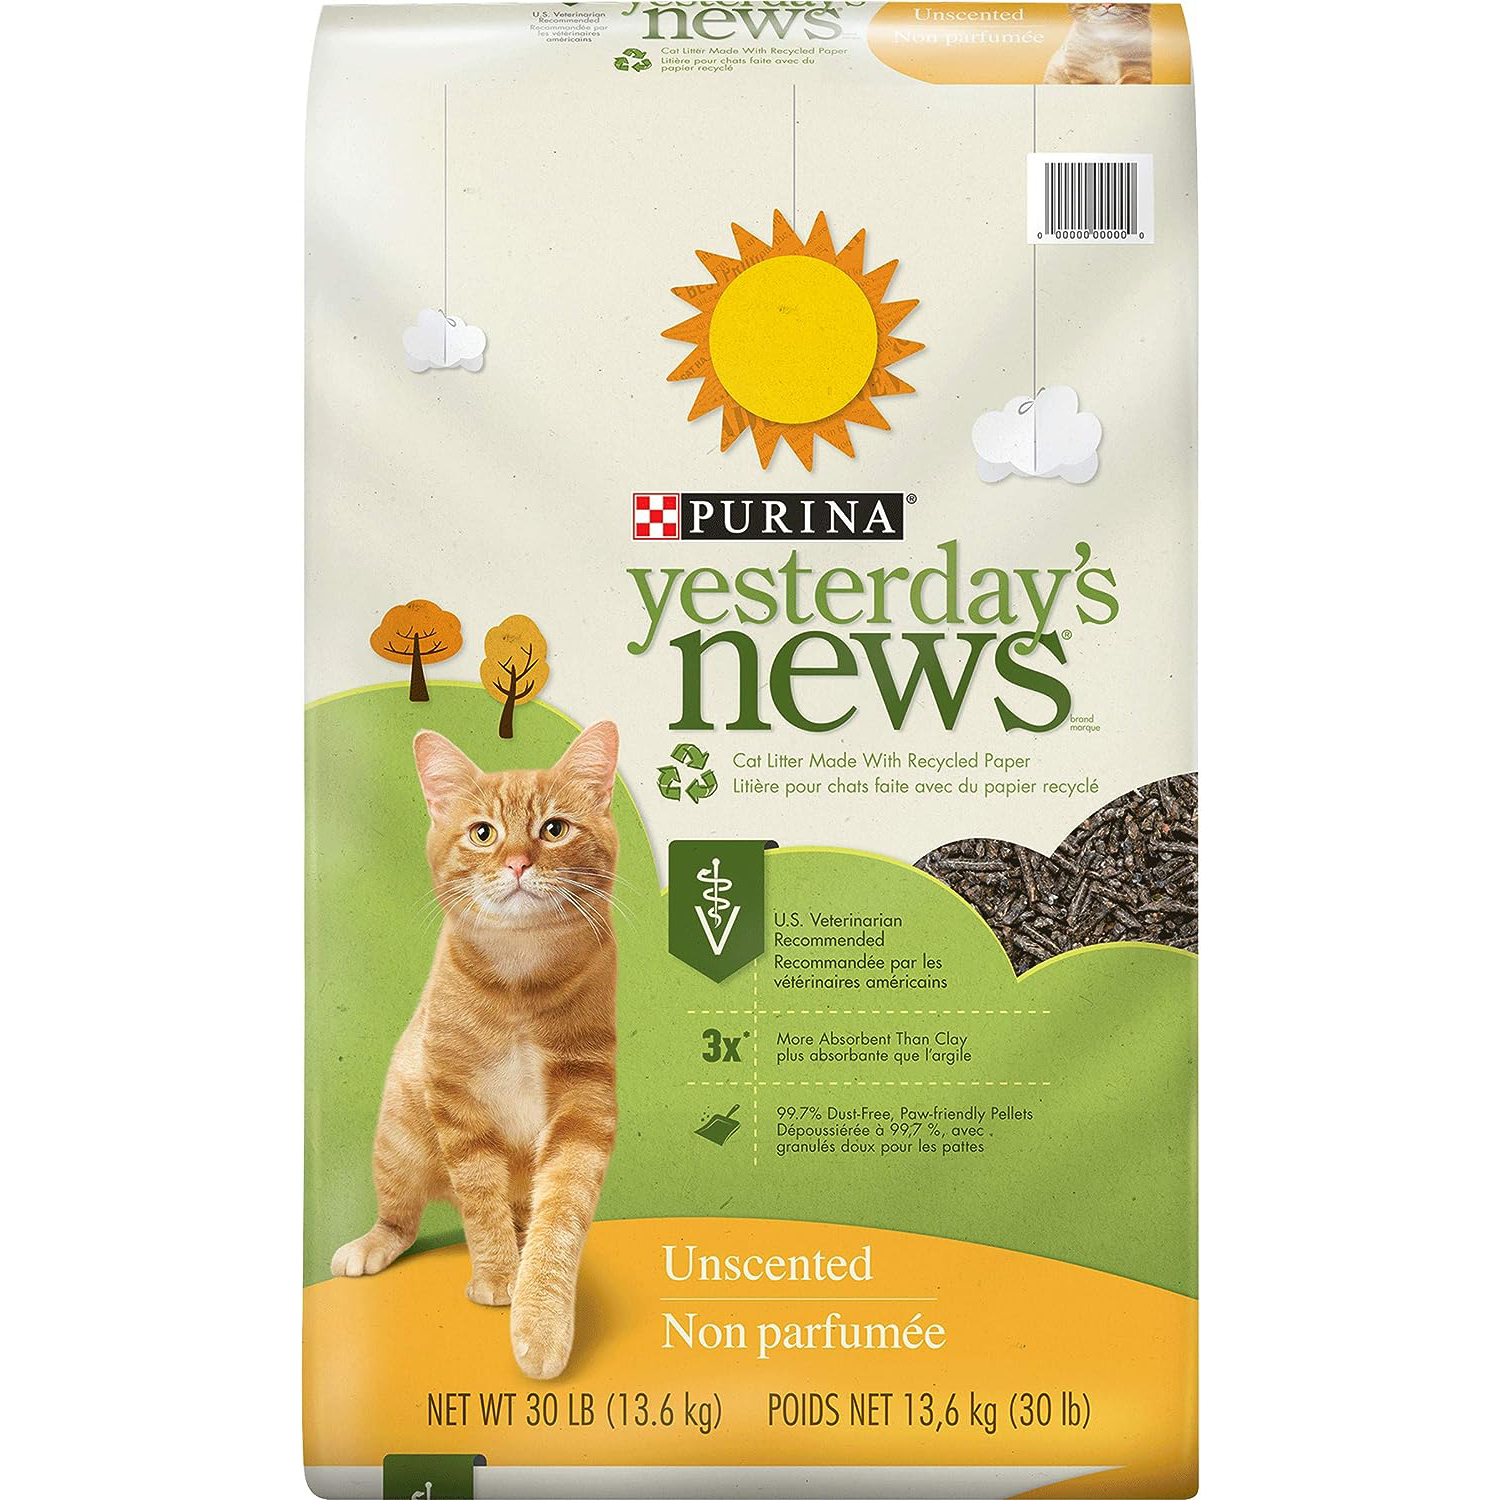 Purina Yesterday's News Non Clumping Paper Cat Litter, Unscented Low Tracking Cat Litter - 30 lb. Bag New